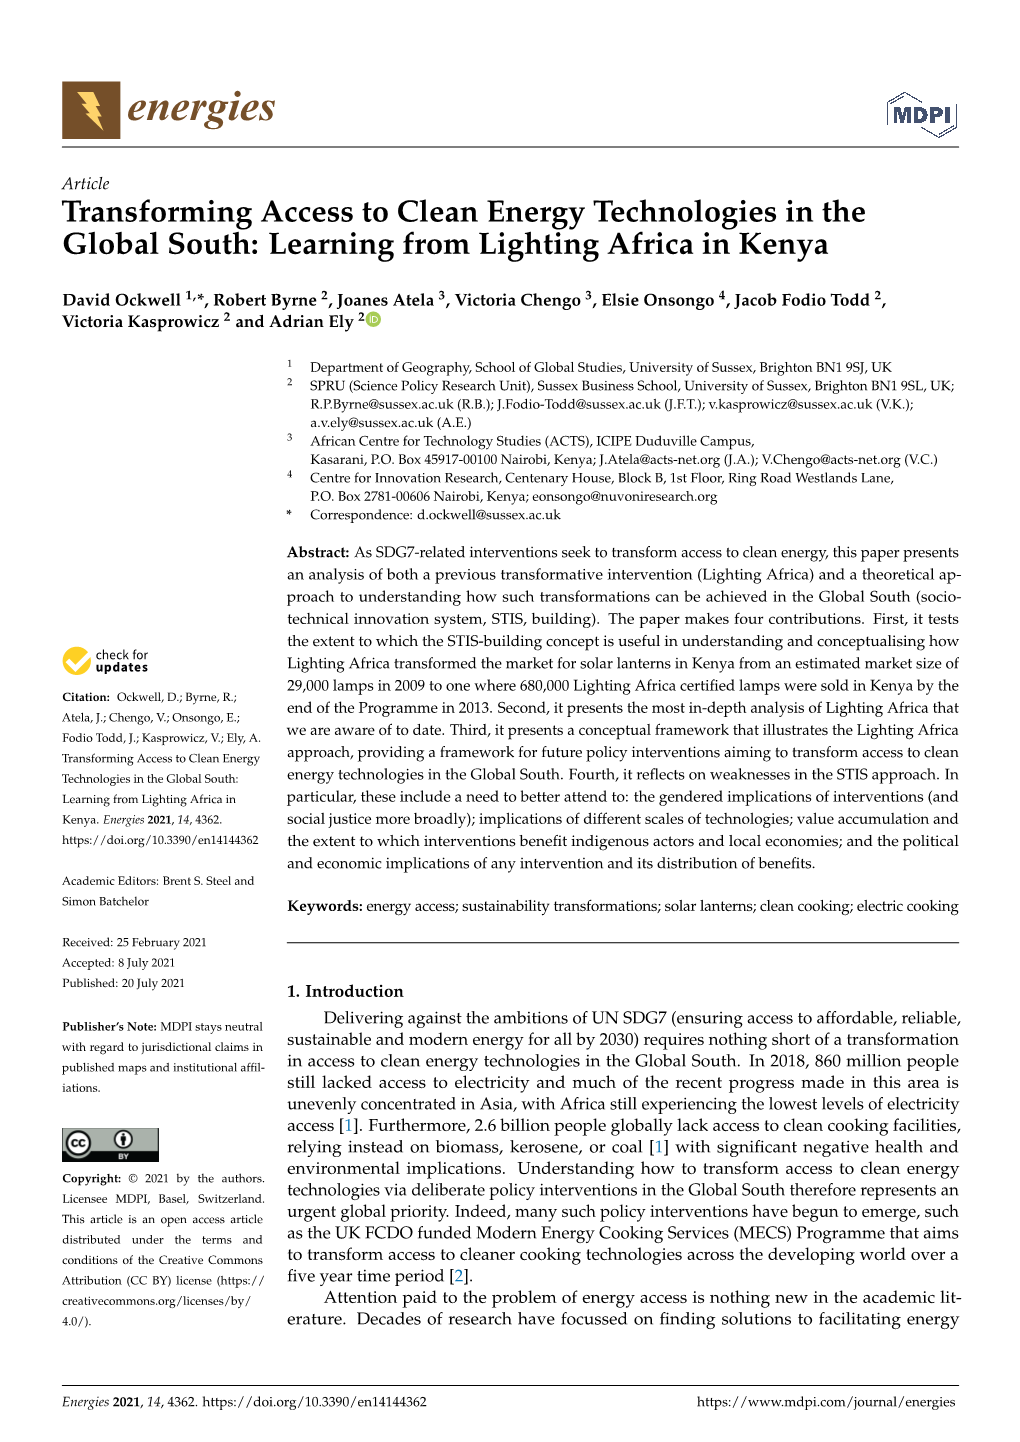 Transforming Access to Clean Energy Technologies in the Global South: Learning from Lighting Africa in Kenya